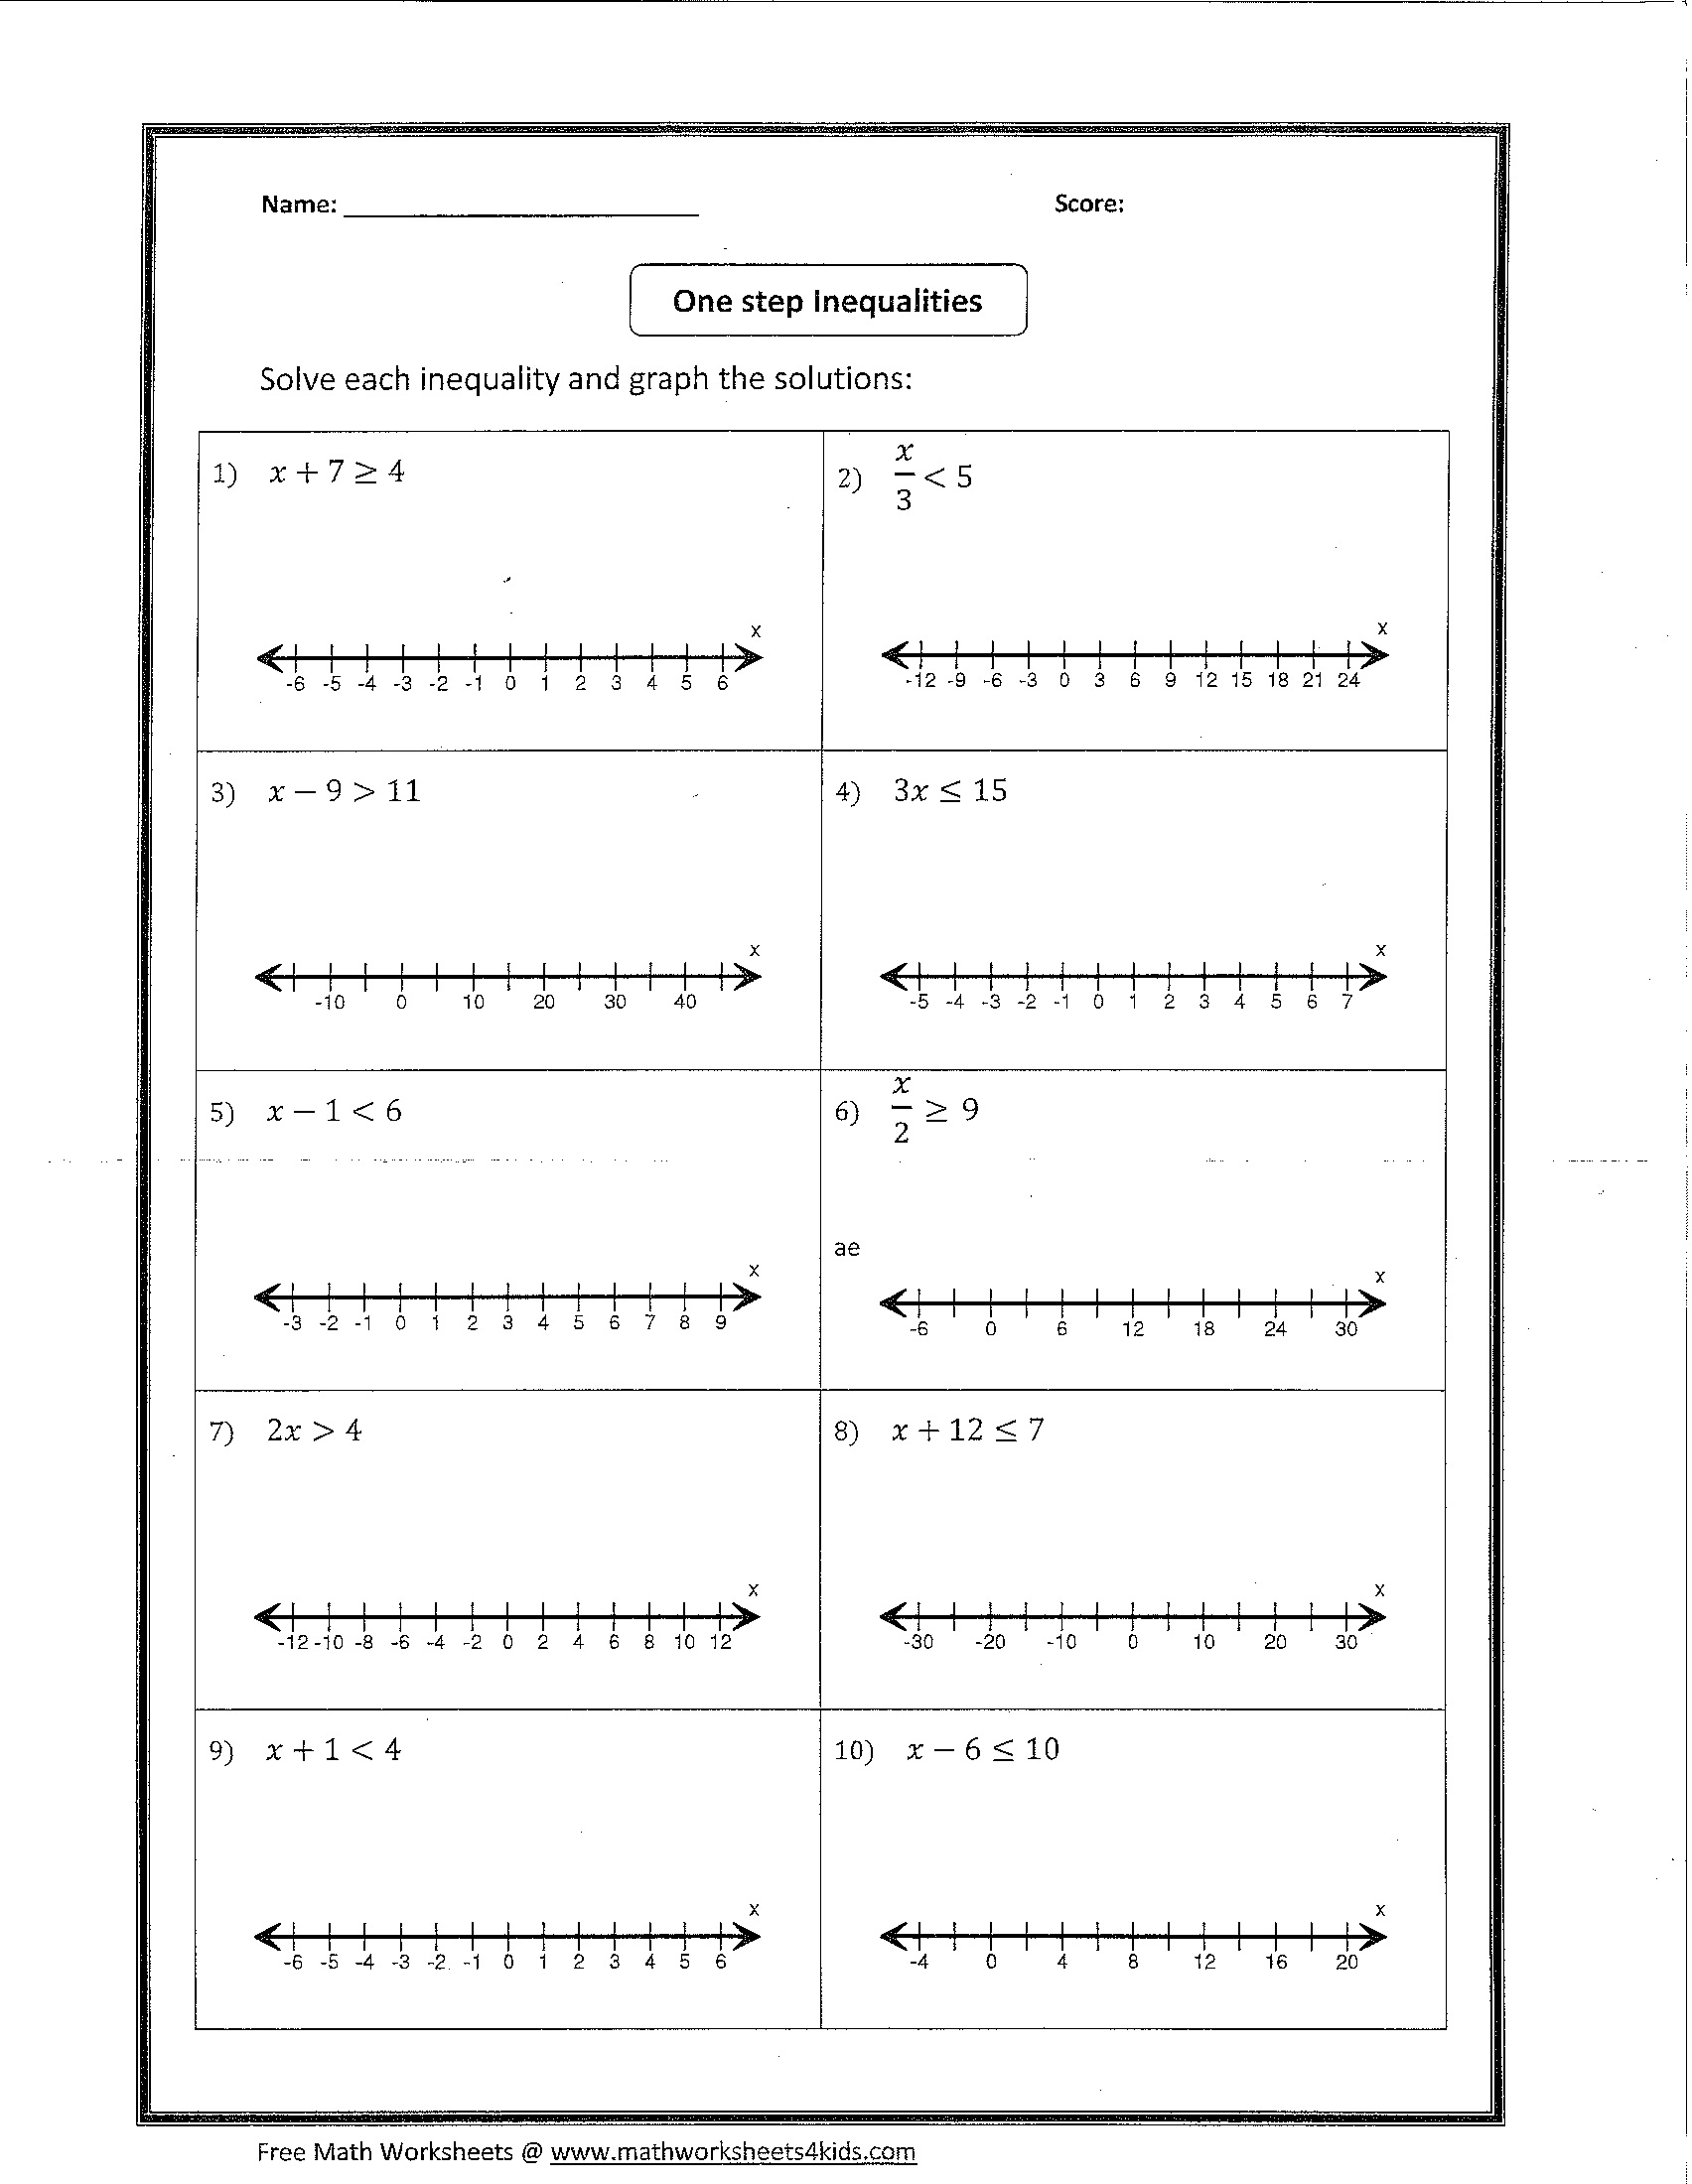 8 Best Images of Graphing Inequalities On A Number Line Worksheets  One Step Inequalities 